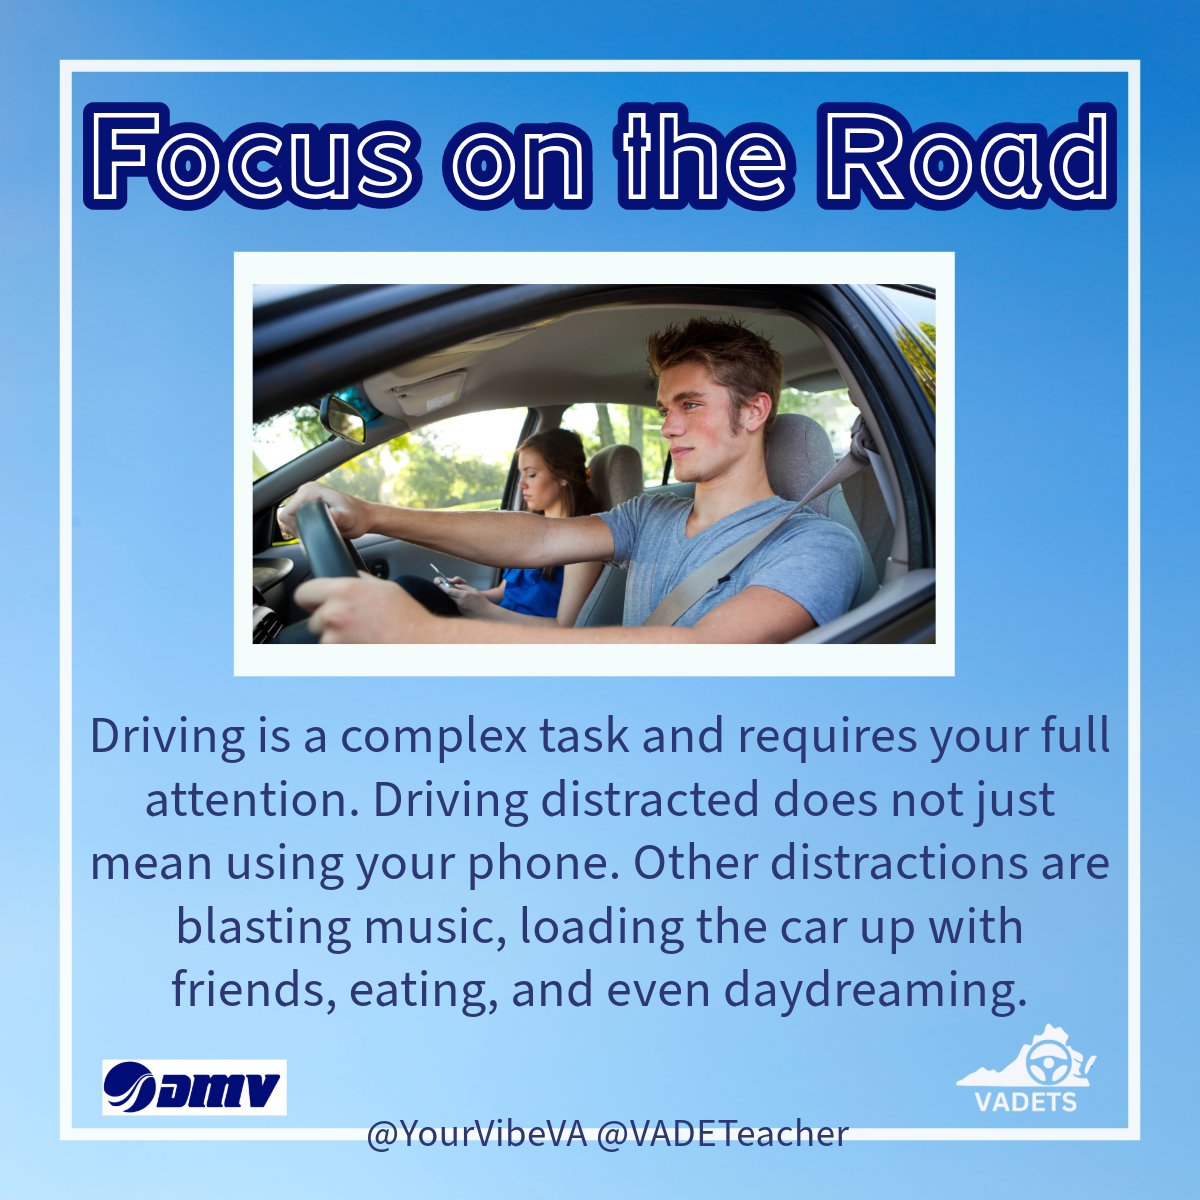 Focus on the Road
Driving distracted does not just mean using your phone. Other distractions are blasting music, loading up the car wih friends, eating and even daydreaming. Always drive focused on the road!
#MySpringVibe #ArriveAlive